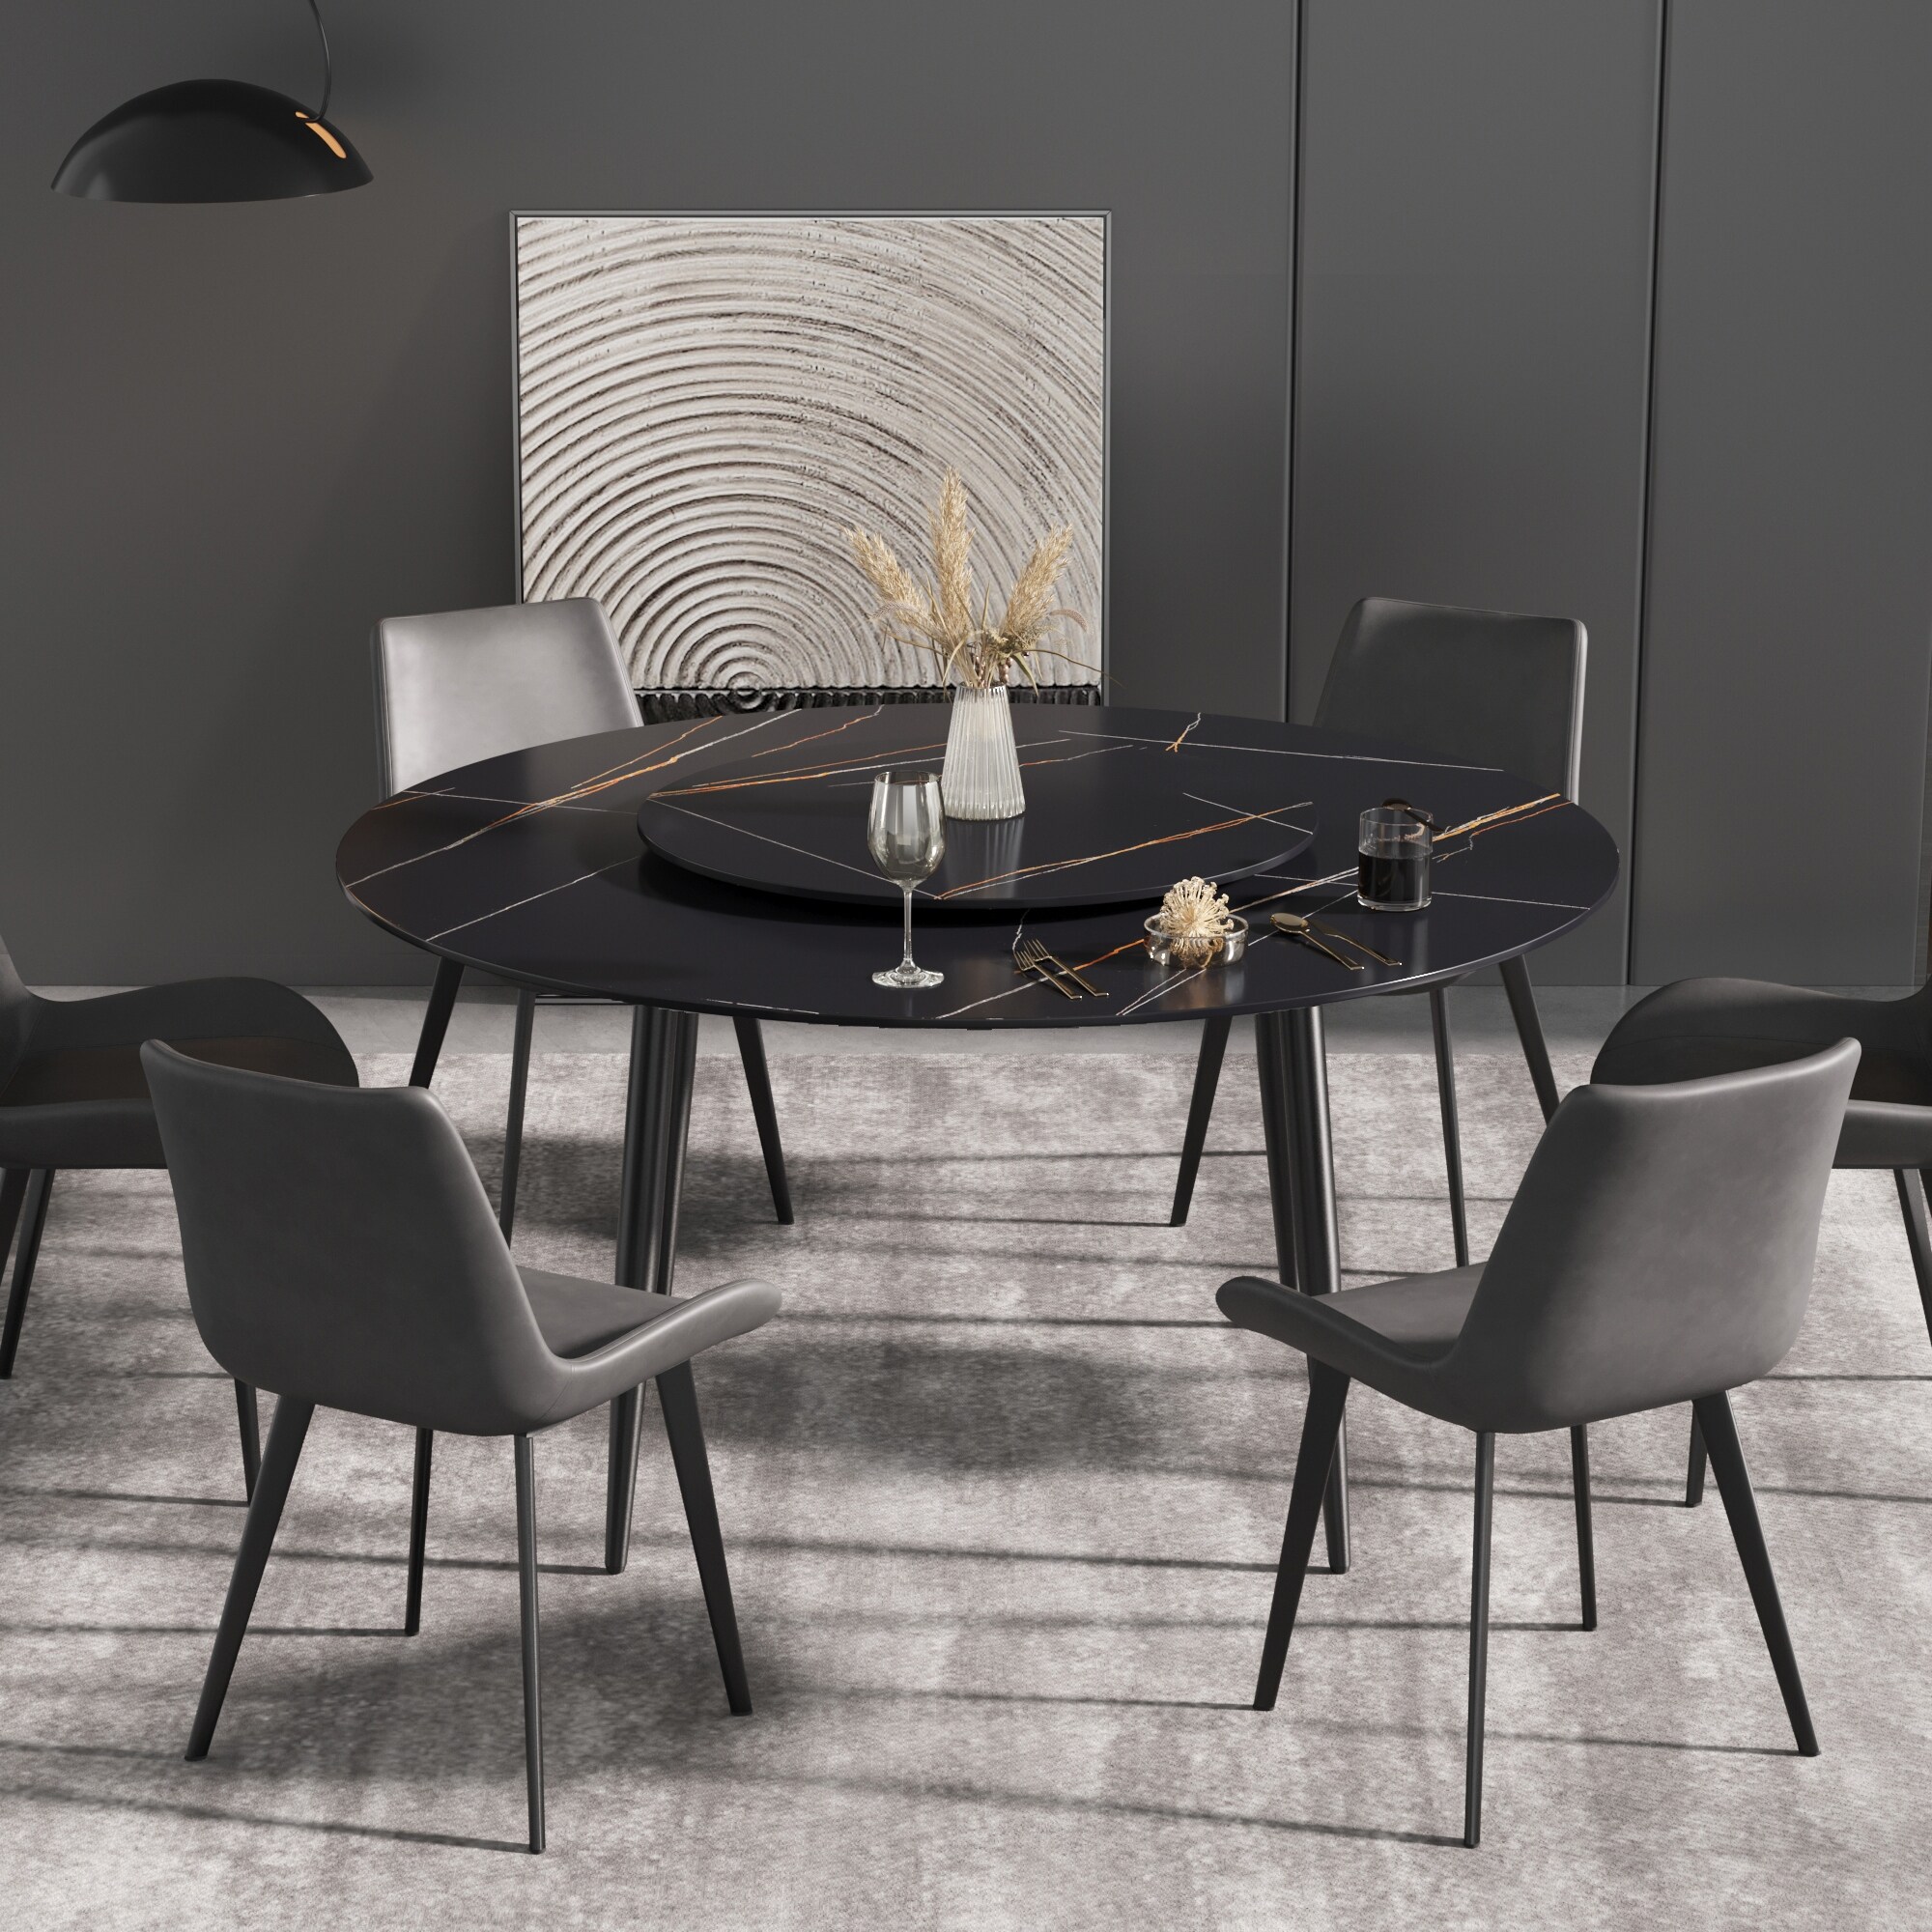 https://ak1.ostkcdn.com/images/products/is/images/direct/257f16106717c65accf1e5c84ba76015cfad2bd5/Simple-Modern-Round-Dining-Table-for-Kitchen-Dining-Room-Restarant.jpg